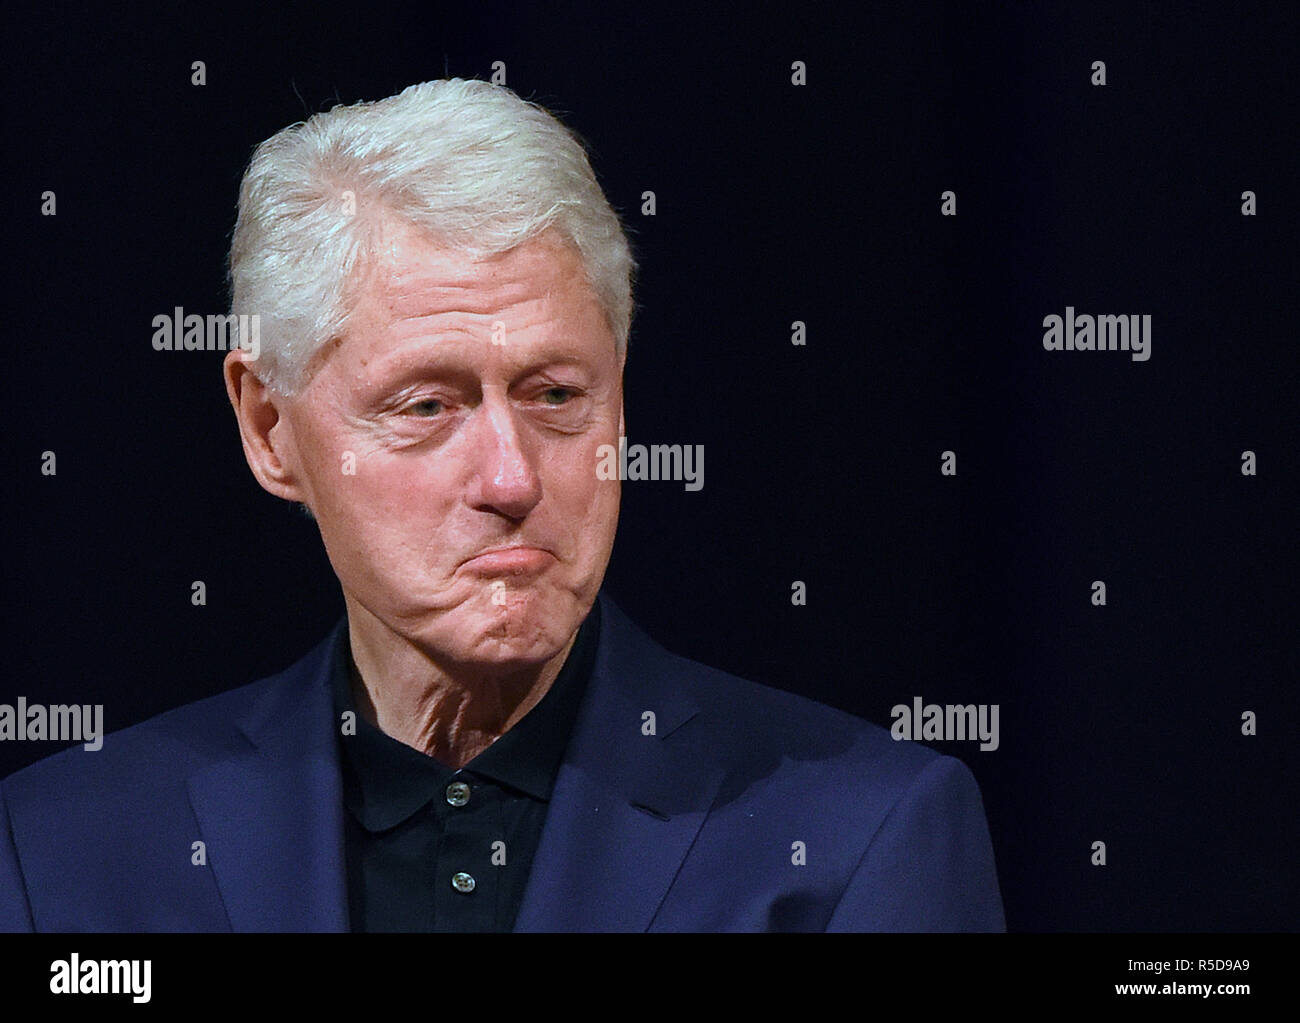 November 30, 2018 - Winter Park, Florida, United States - Former U.S. President Bill Clinton discusses his book 'The President is Missing', co-written with author James Patterson, before an audience during the Orlando SentinelÕs Unscripted presents Bill Clinton and James Patterson in partnership with WriterÕs Block Book Store on November 30, 2018 at Winter Park High School in Winter Park, Florida. (Paul Hennessy/Alamy) Stock Photo